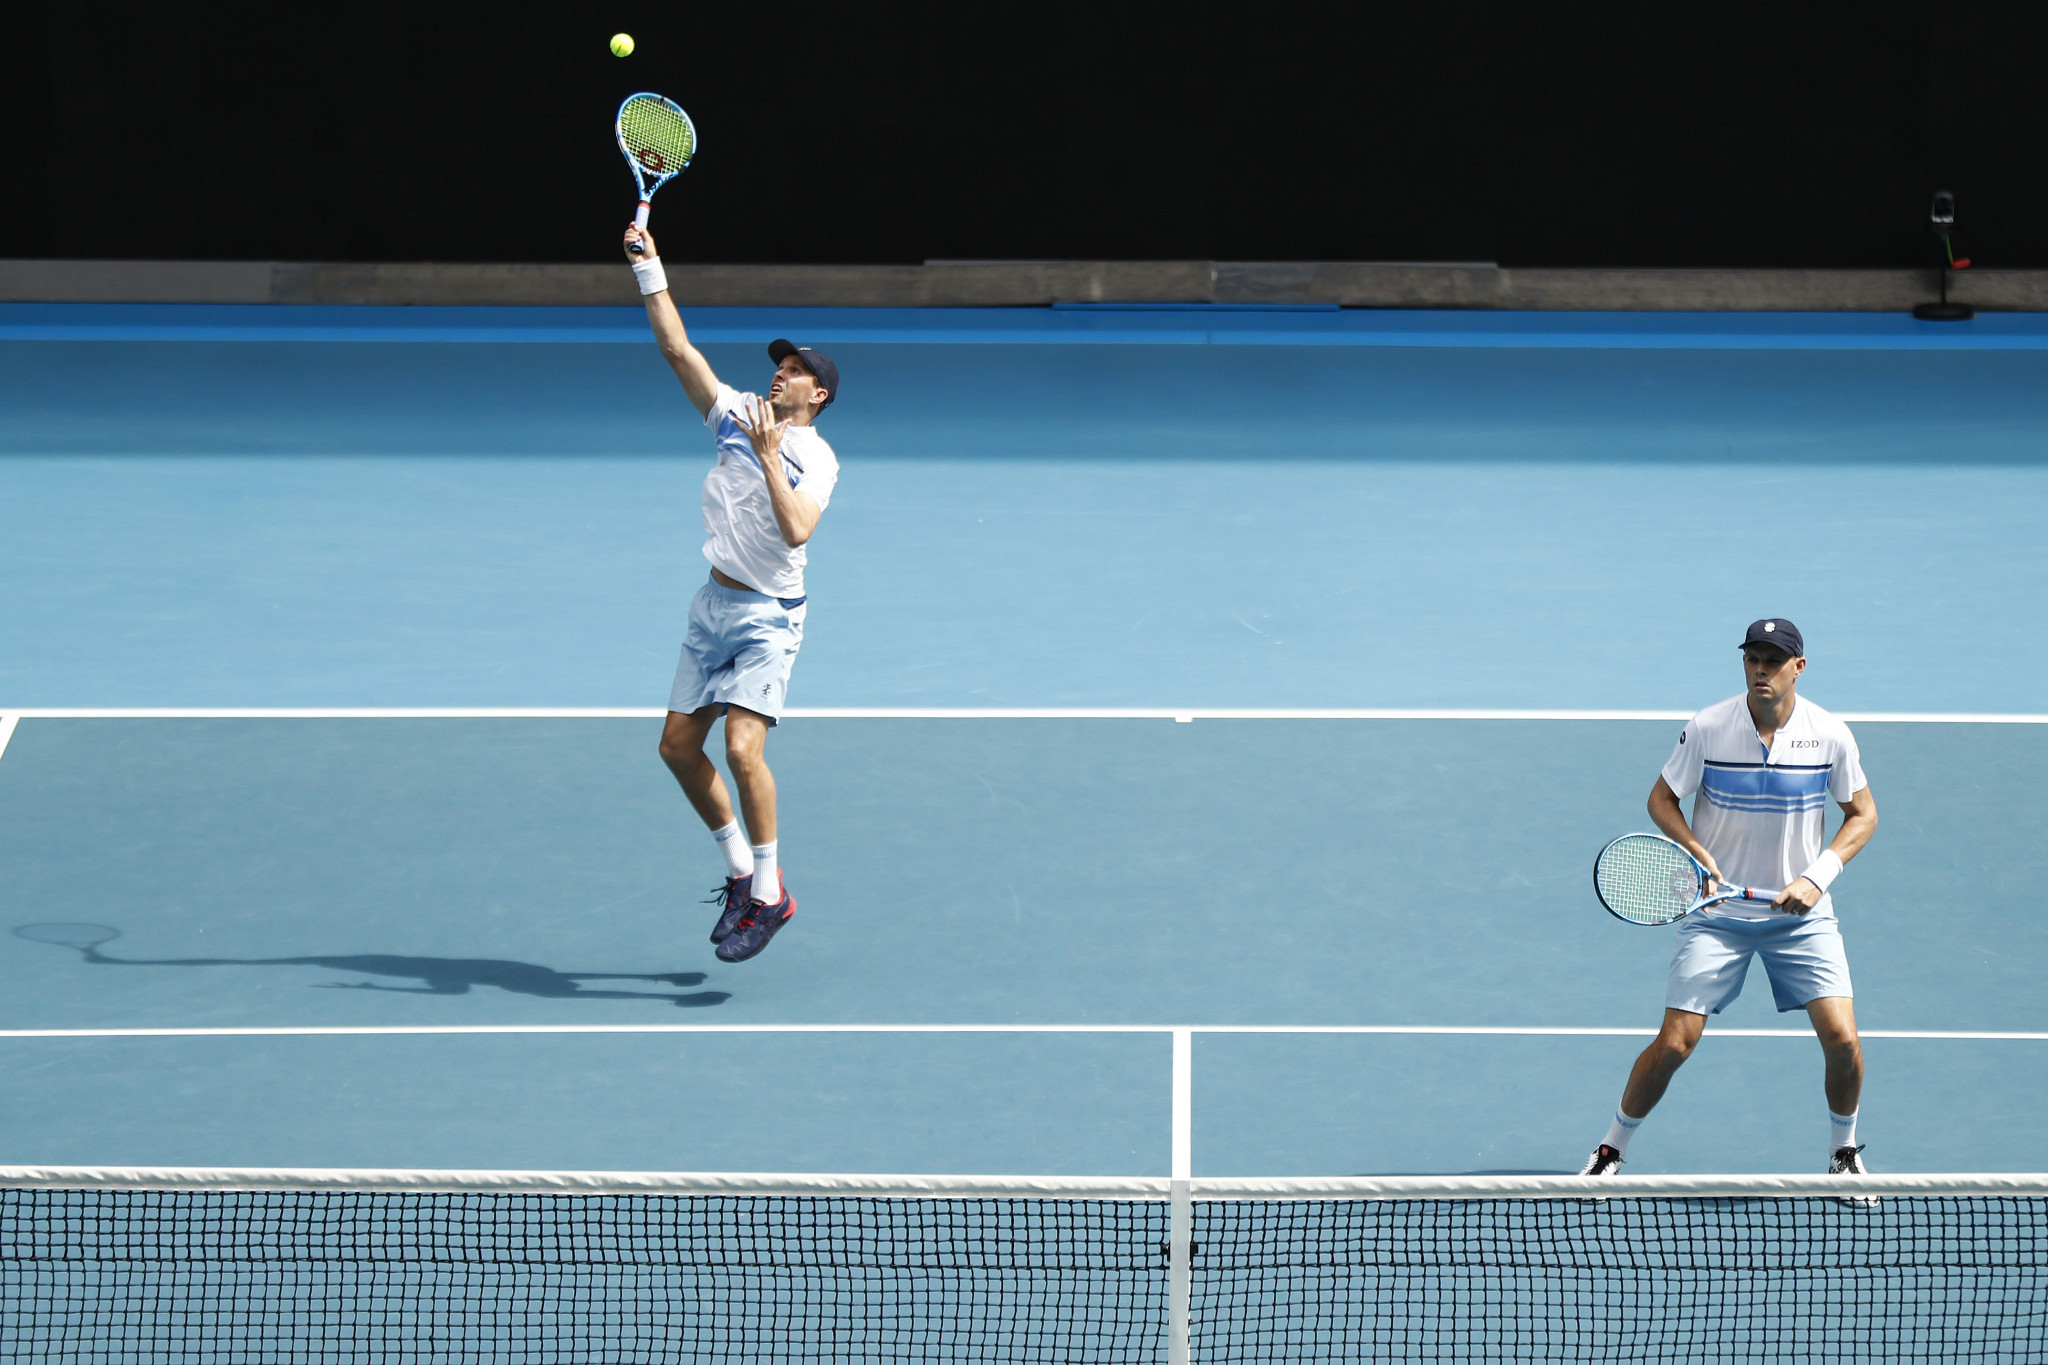 Record-setting doubles pair Bryan brothers announce retirement